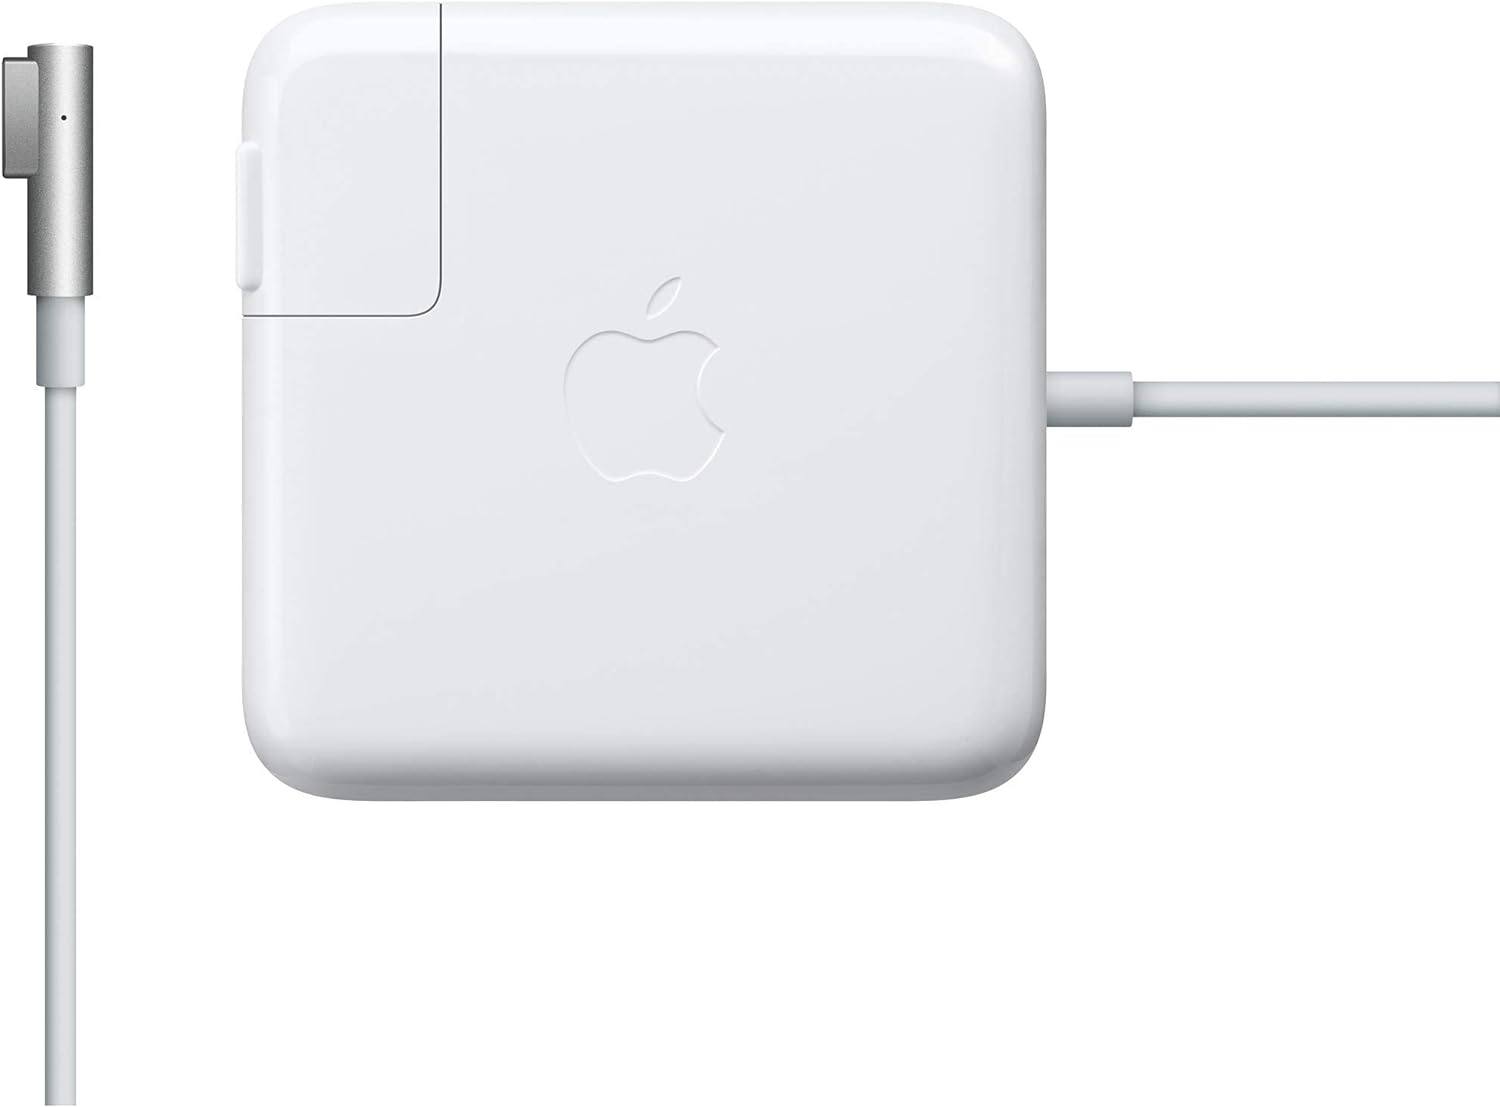 Apple 85W MagSafe Power Adapter for 15- and 17-Inch MacBook Pro: Detailed Review & Recommendations